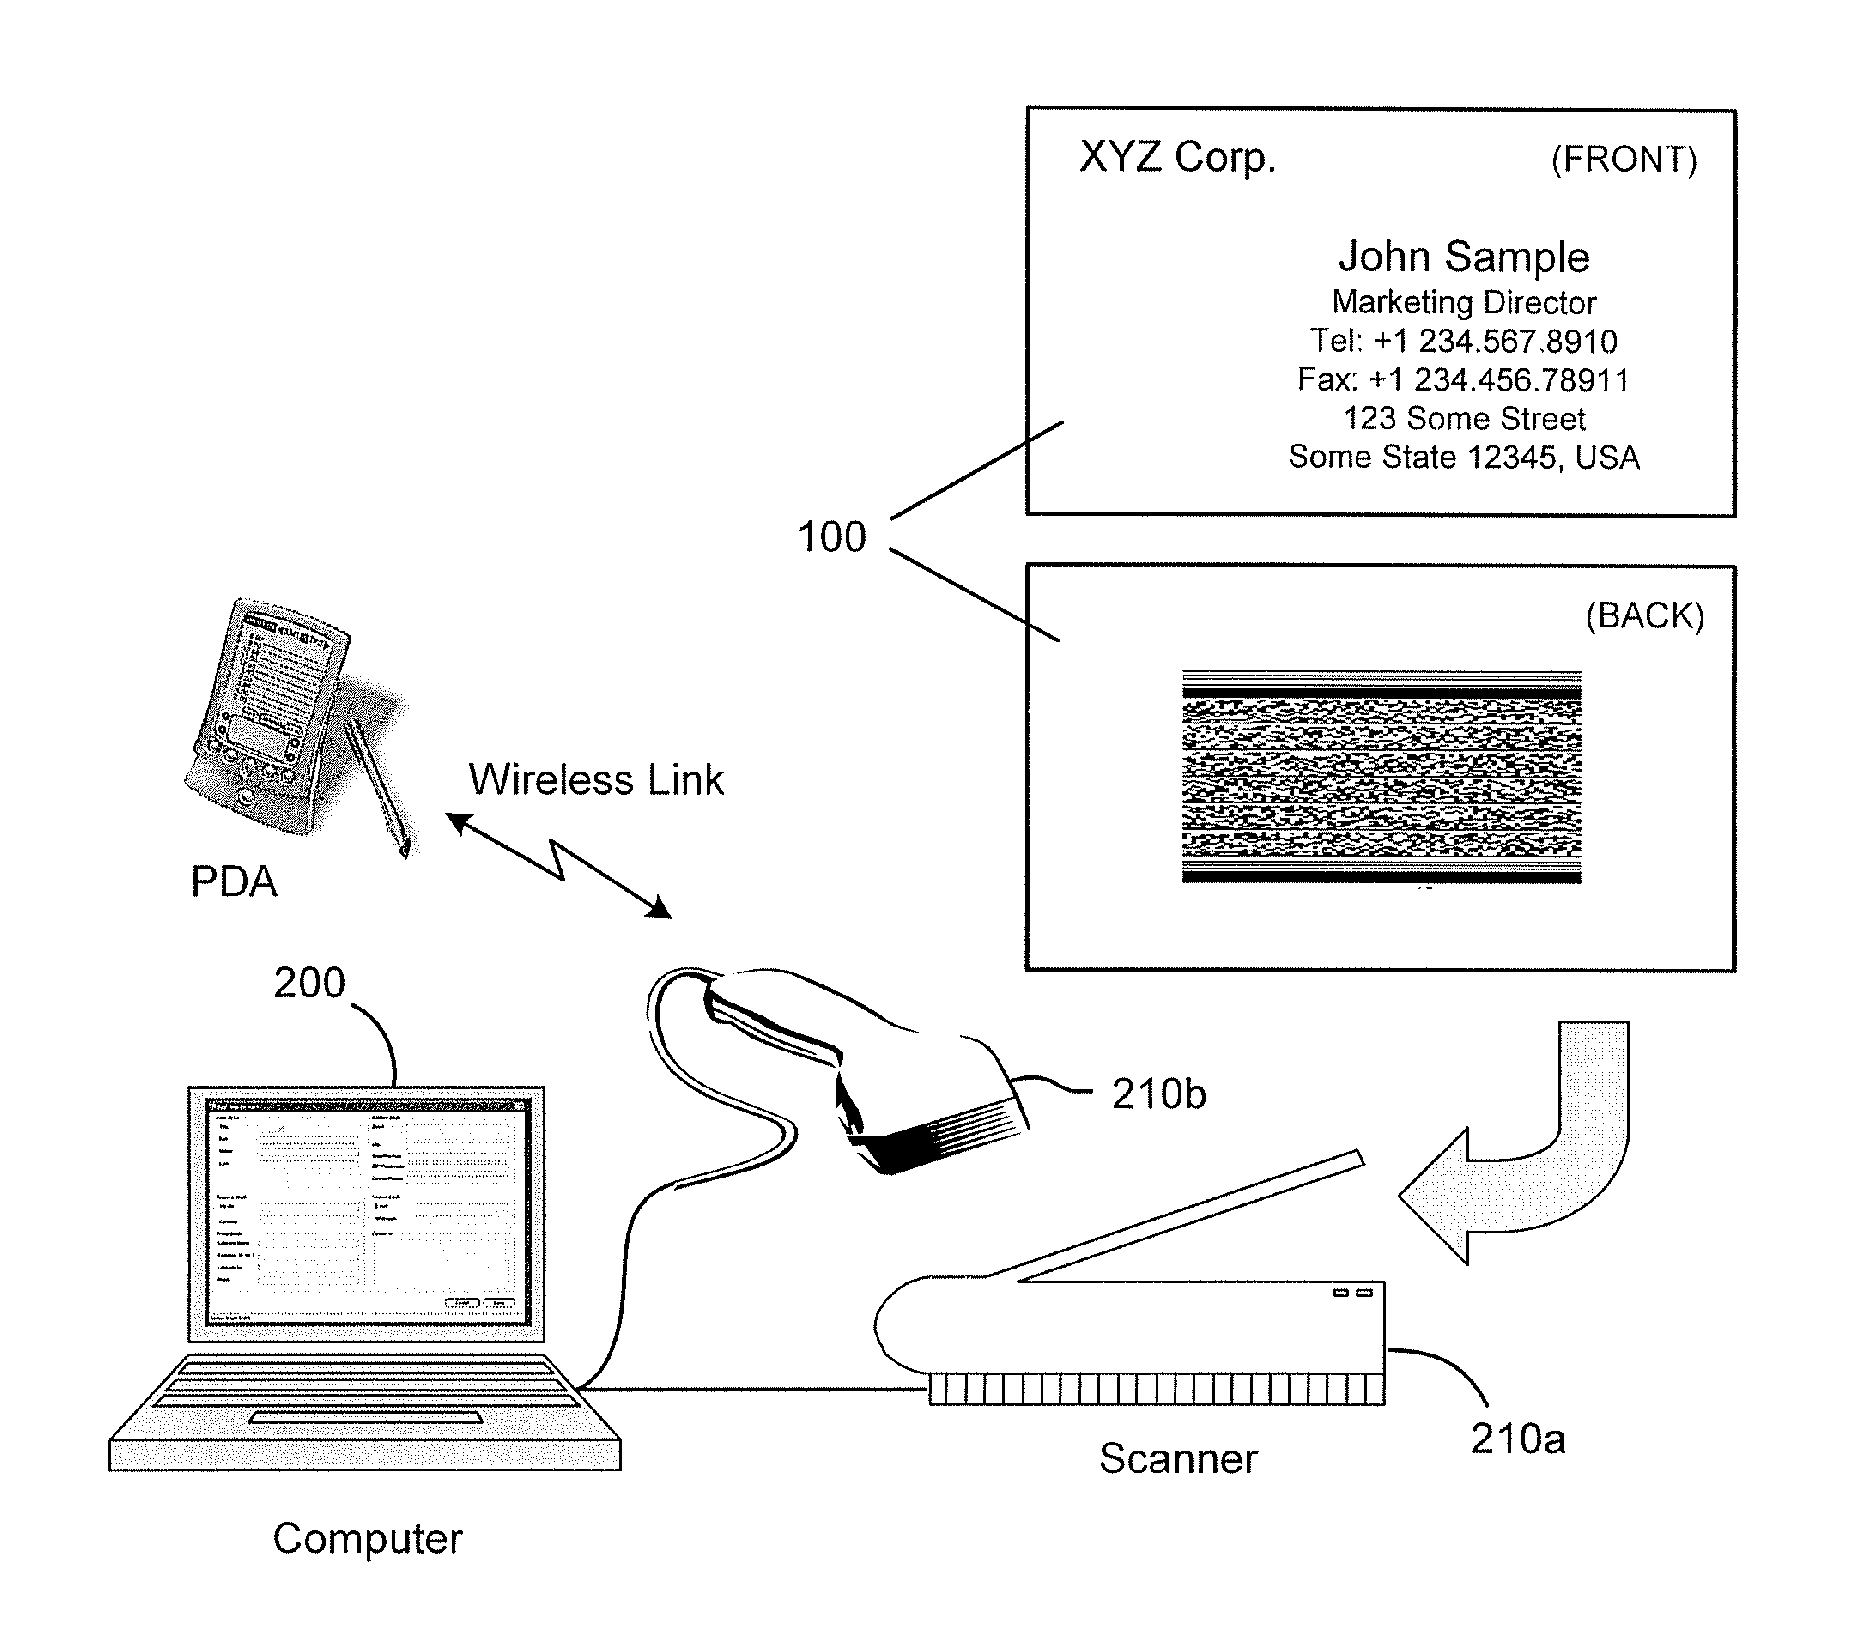 Method and system for using barcoded contact information for compatible use with various software